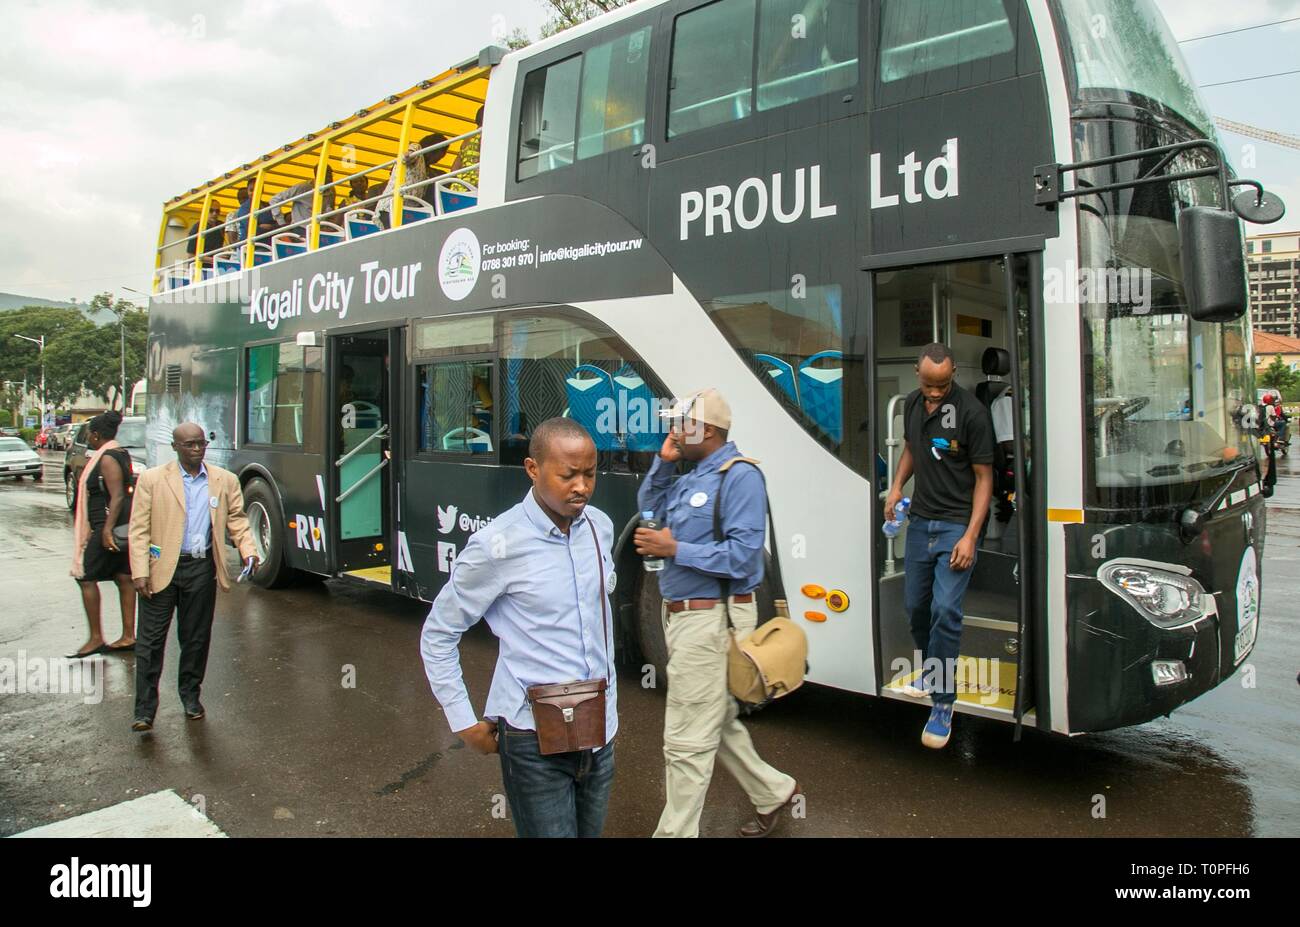 Kigali, Rwanda. 21st Mar, 2019. Passengers get off Kigali's first double-decker tour bus following its unveiling ceremony in Kigali, capital of Rwanda, on March 21, 2019. Rwanda Development Board in collaboration with Kigali City Tour Limited, a private company, on Thursday unveiled Kigali's first double-decker tour bus, which will be used for sightseeing in the city. Credit: Cyril Ndegeya/Xinhua/Alamy Live News Stock Photo